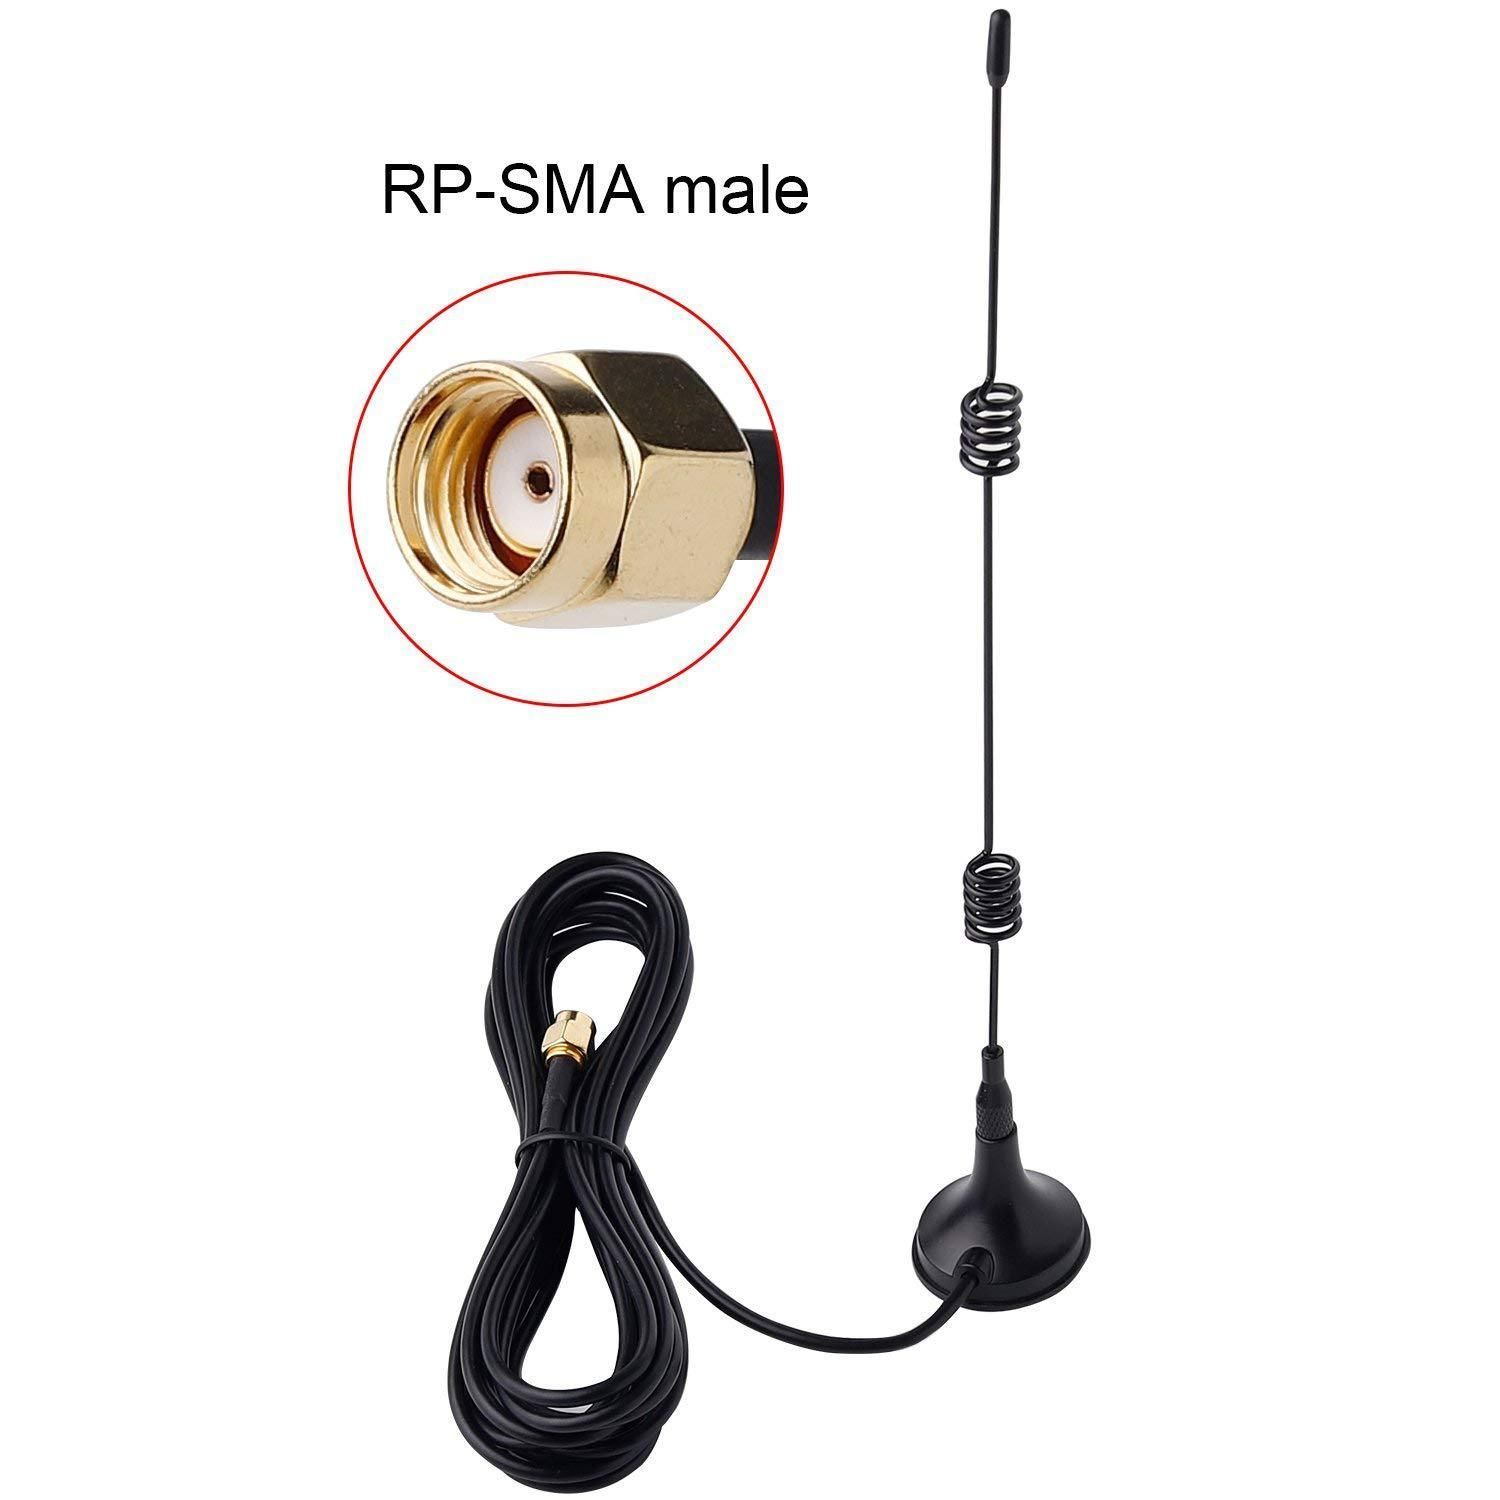 Bakeey-24G-Antenna-Wireless-Wifi-Network-Card-Router-Module-Antenna-RF-Radio-Frequency-Antenna-Magne-1721868